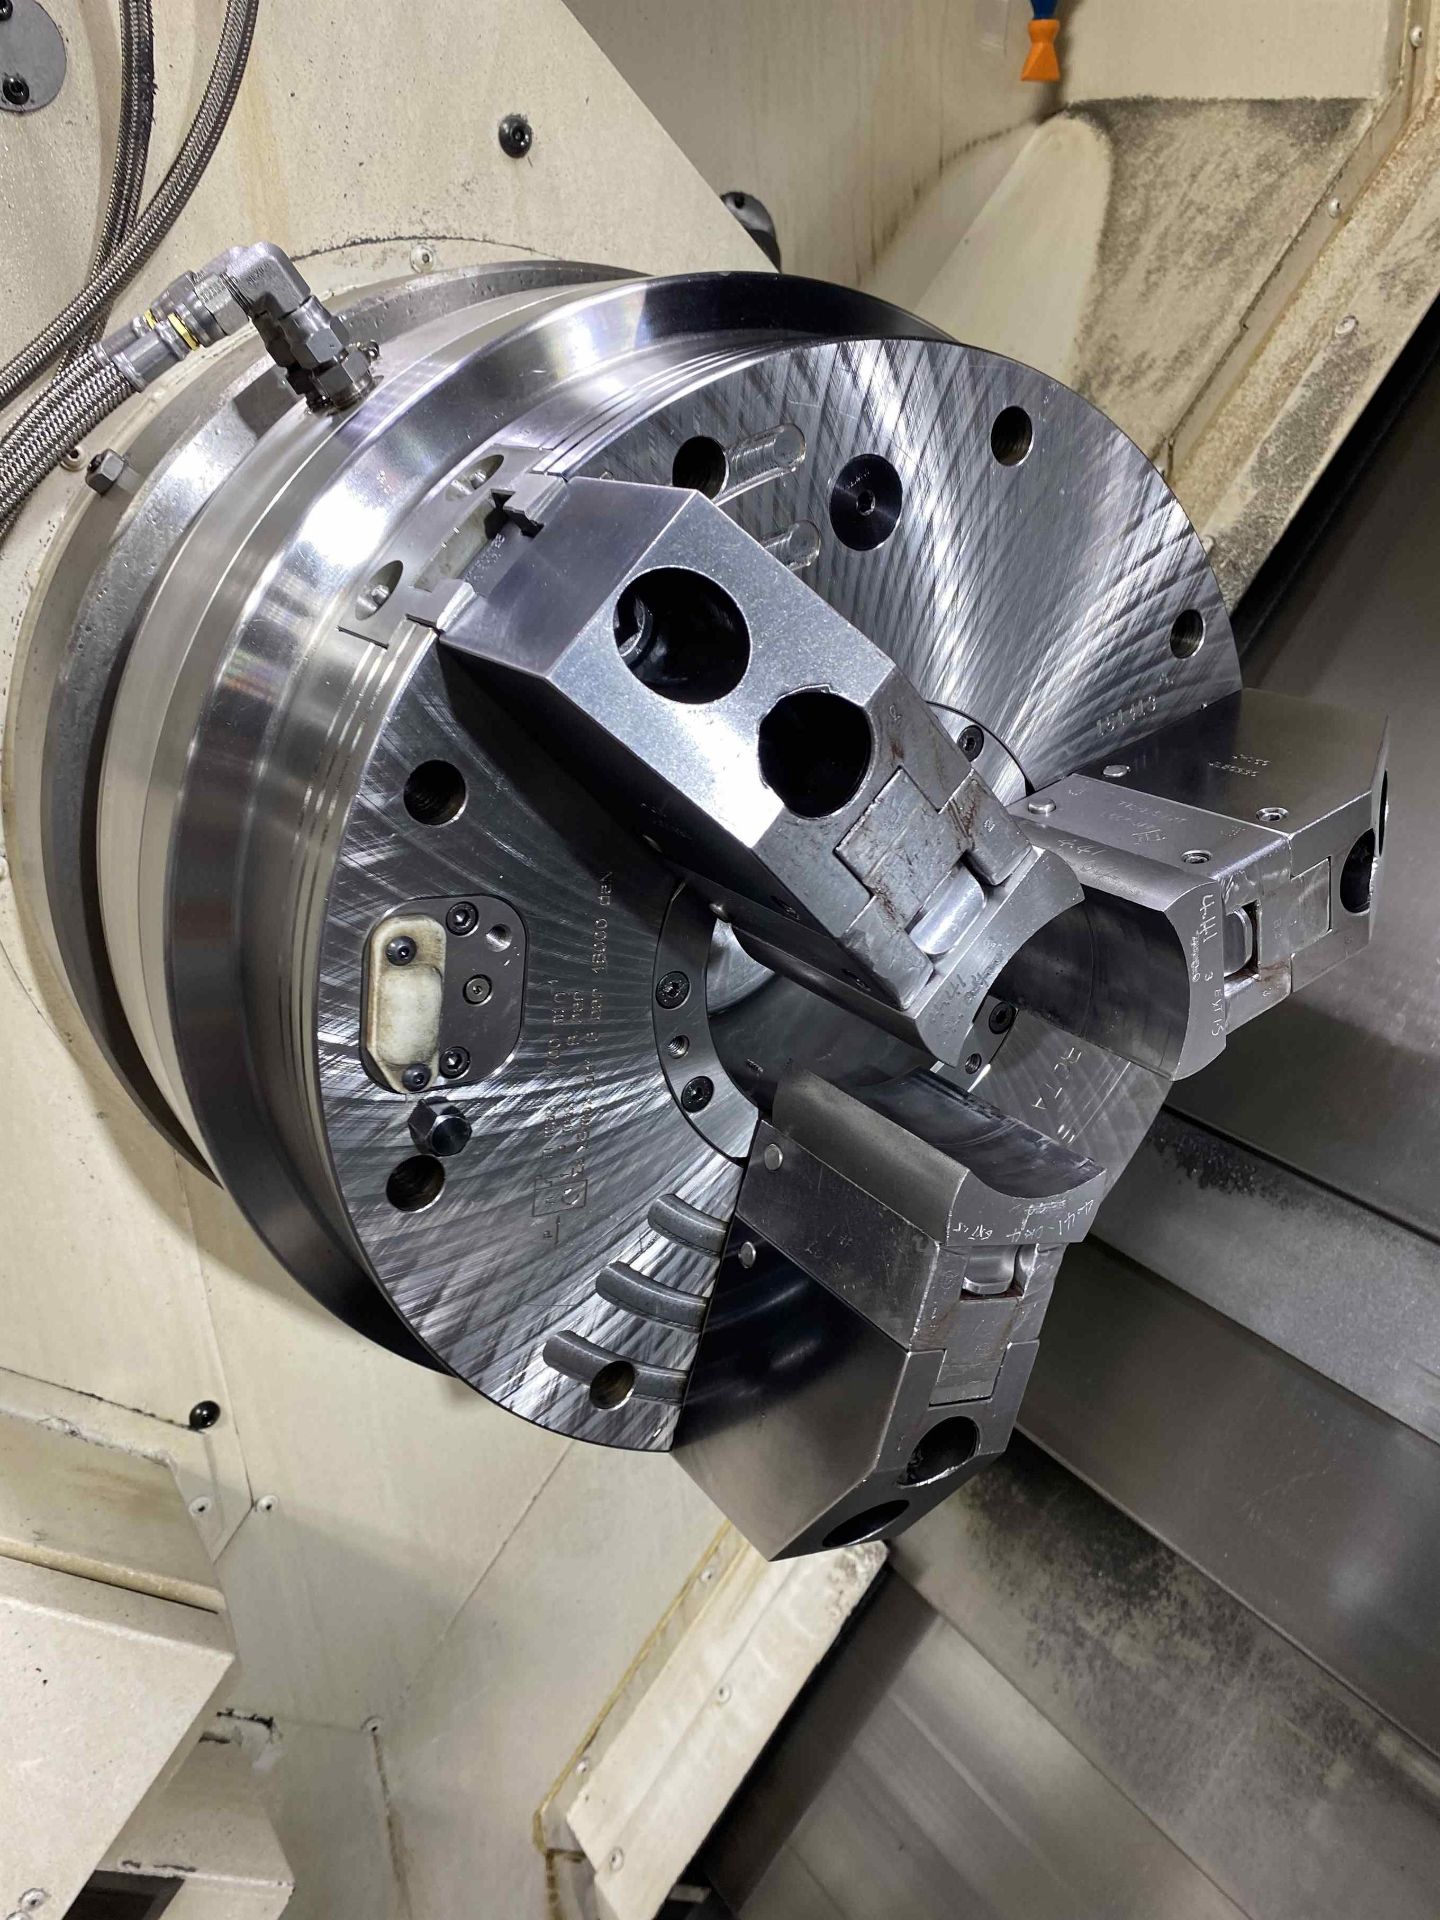 2015 OKUMA LU35II ST1500 Turning Center, s/n 189297, w/ OSP-P300L Control (NO TOOLING INCLUDED) - Image 4 of 9